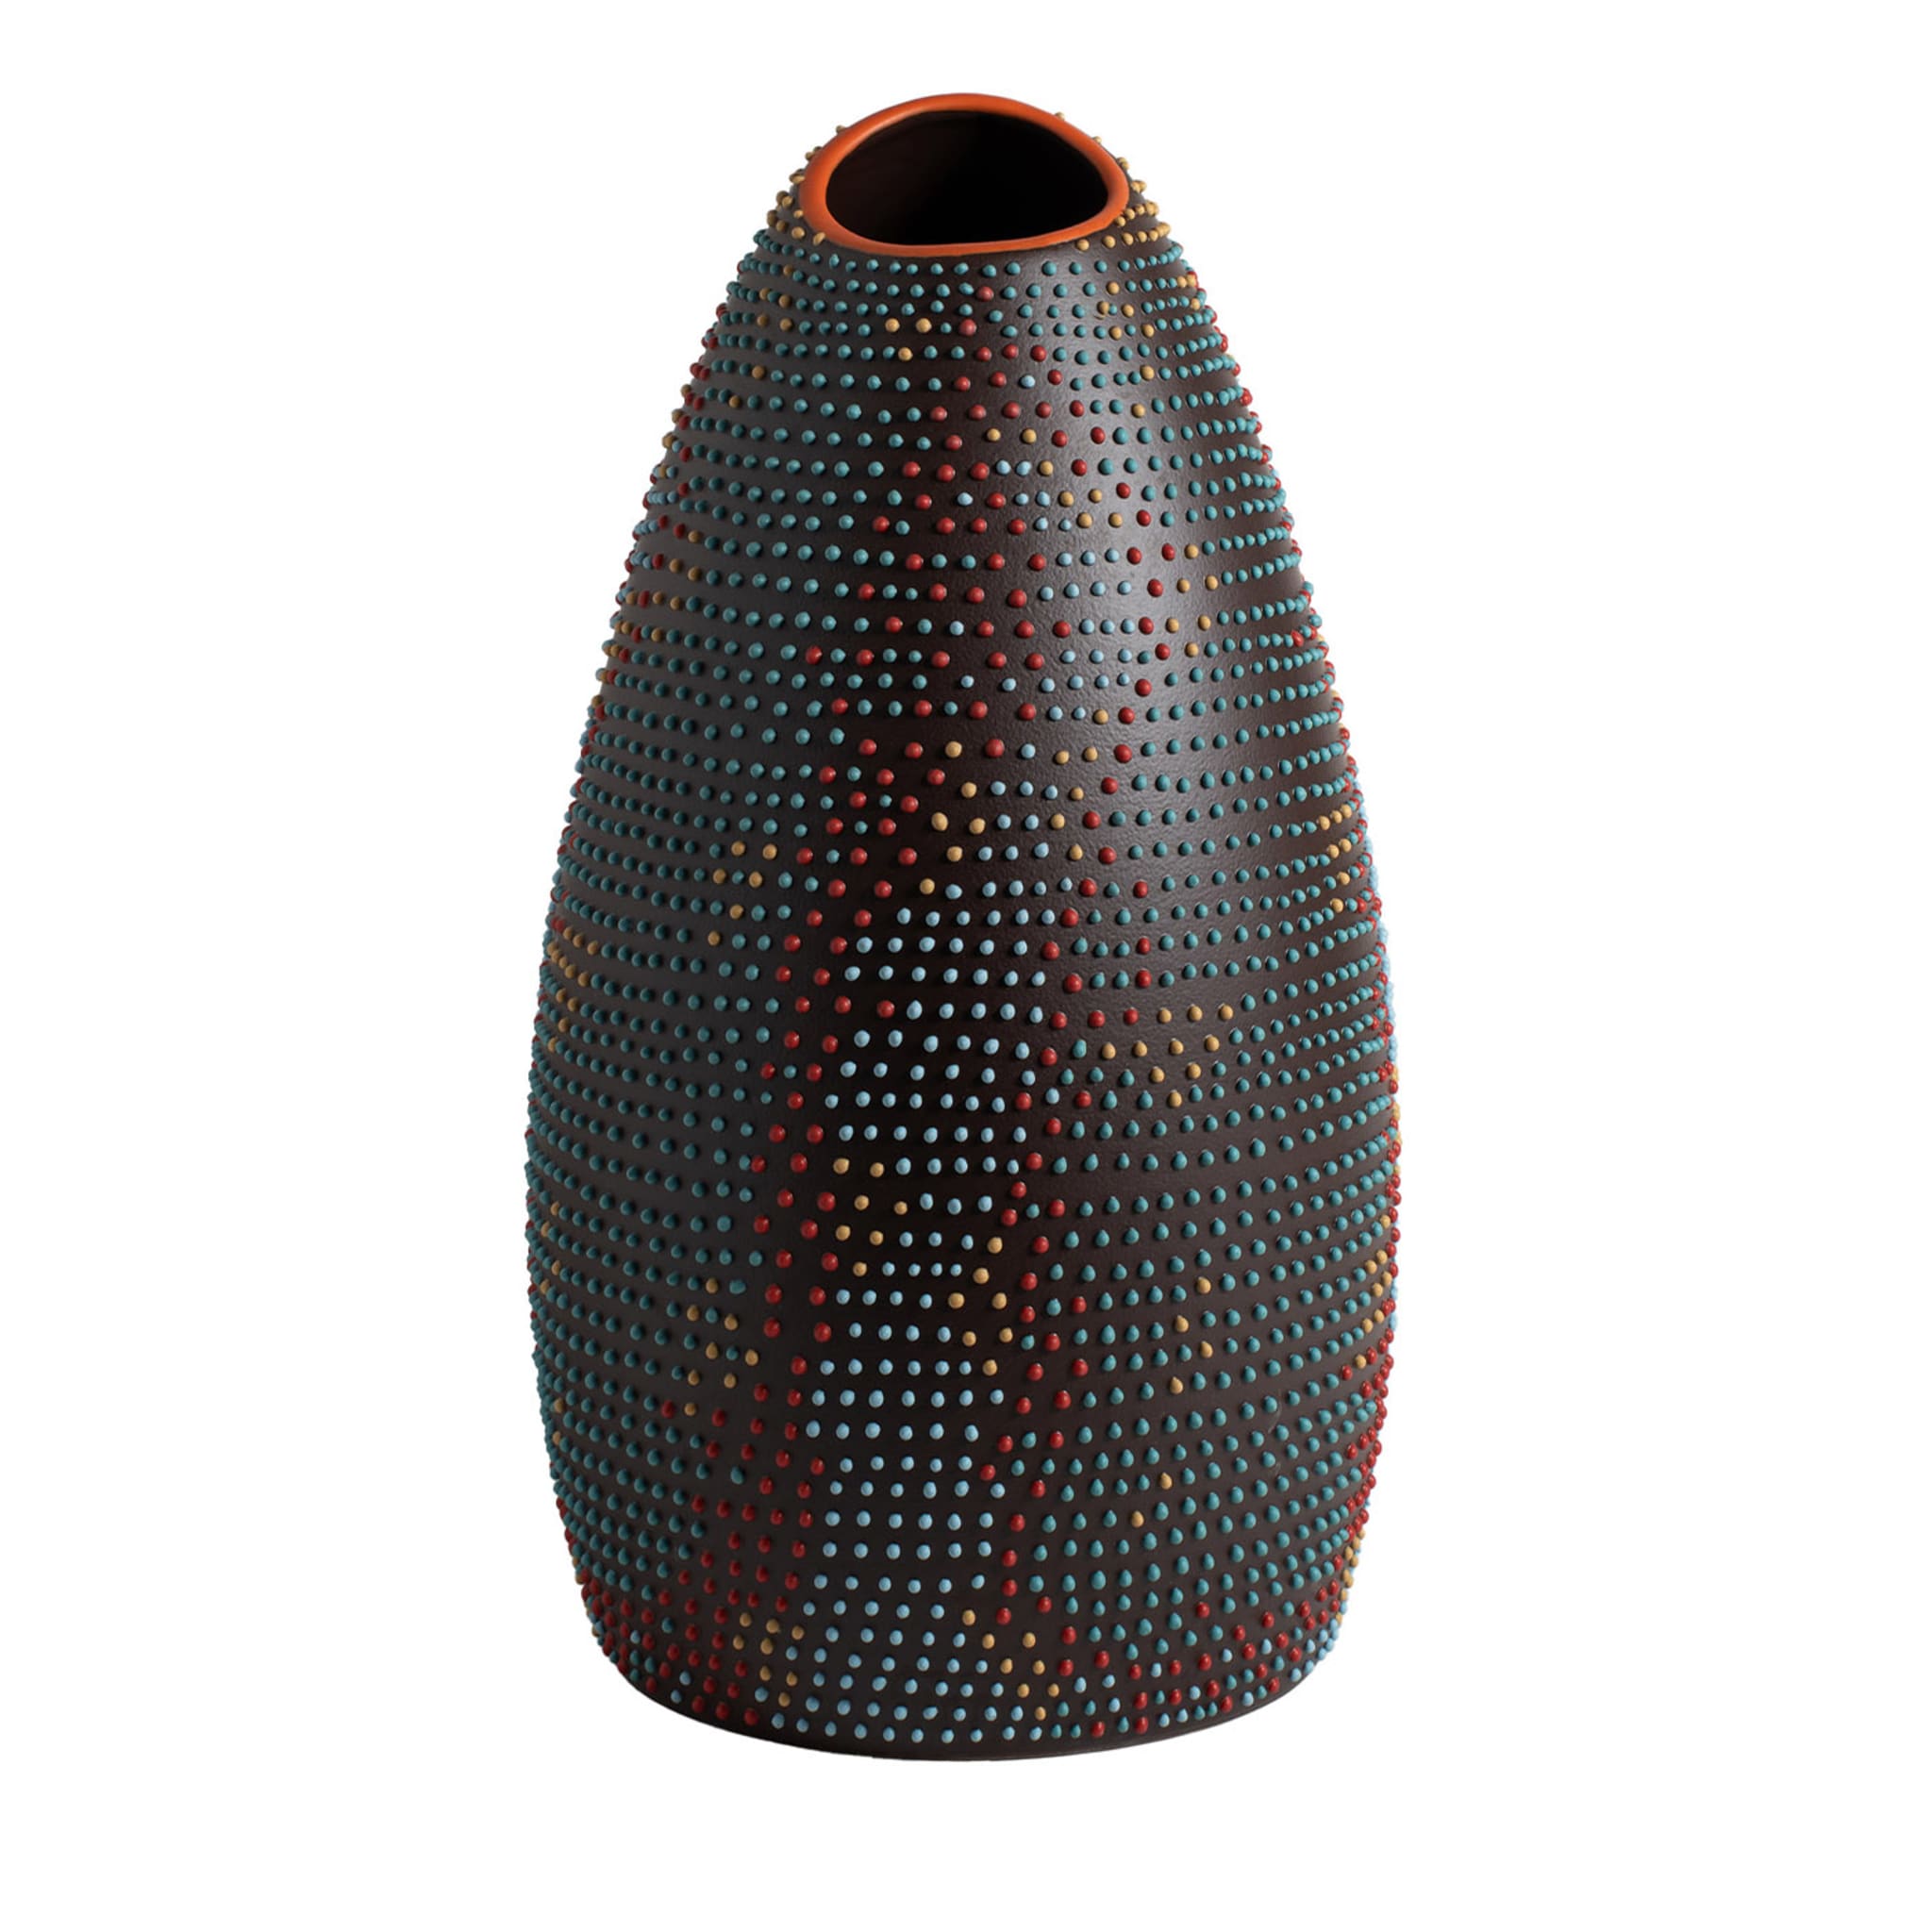 RIC-4 Chameleon Polychrome Vase by A. Mancuso/Analogia Projects - Main view